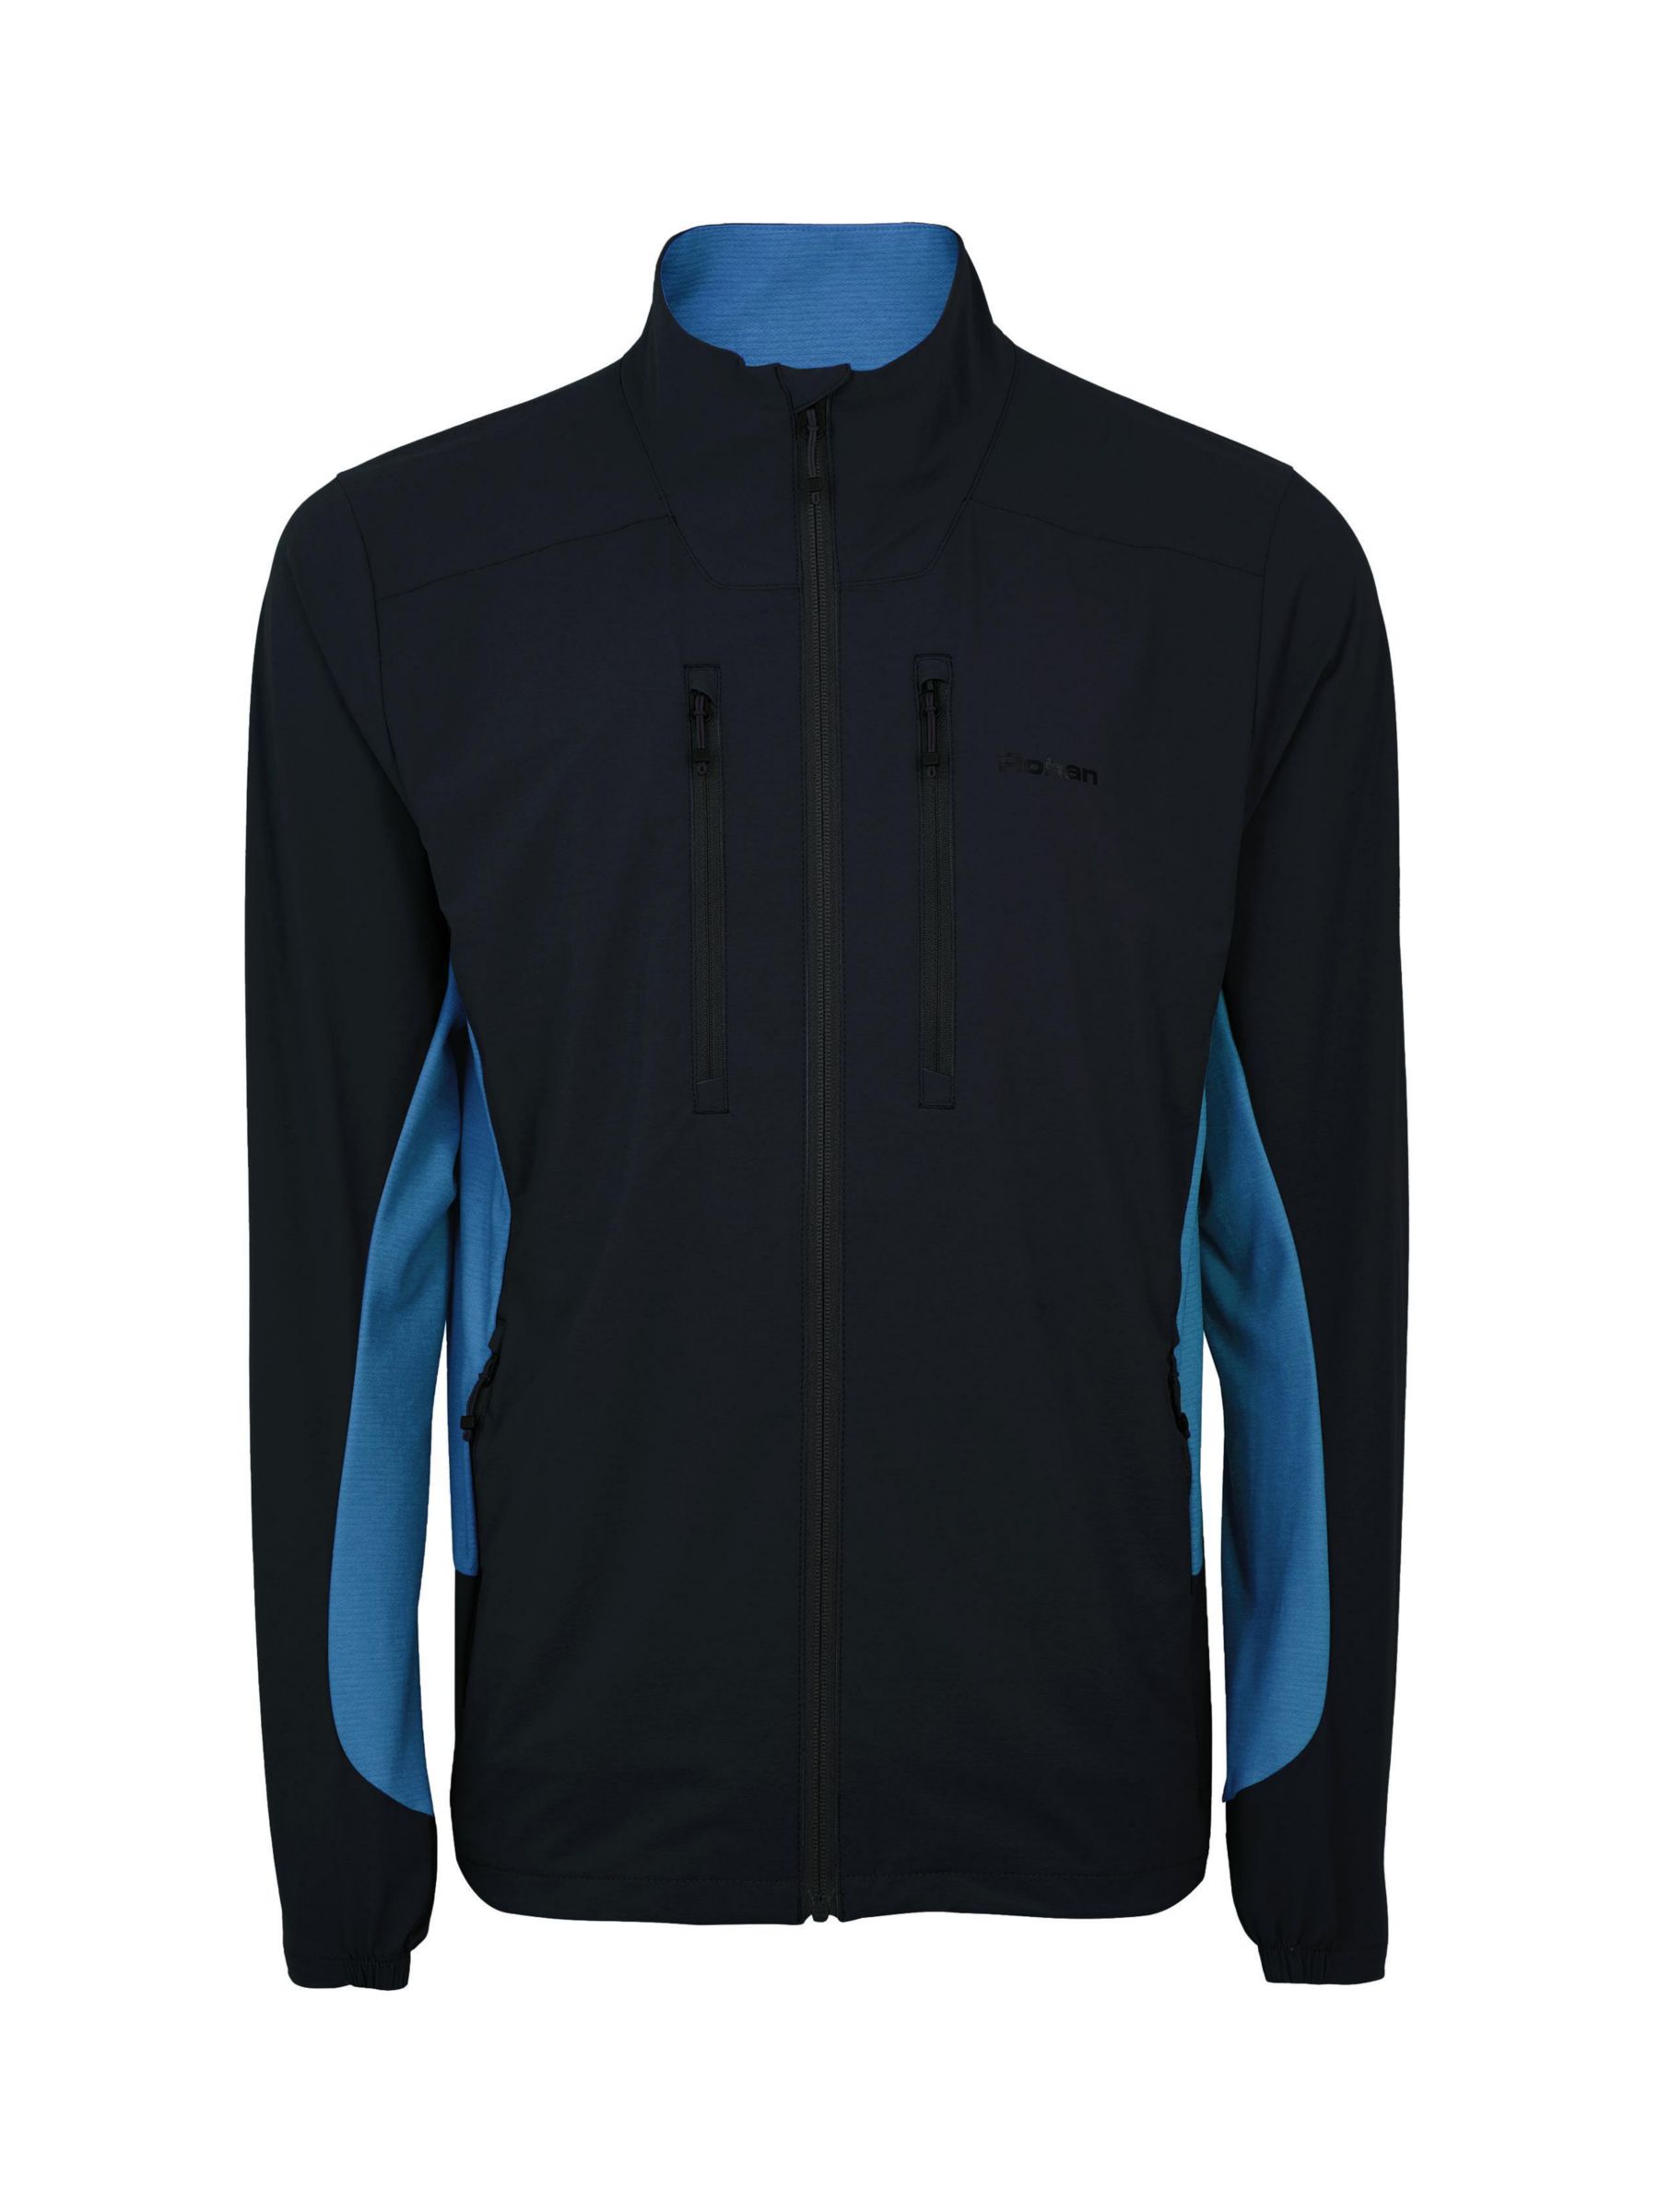 Buy Rohan Fjell Vapour Stretch Jacket, True Navy/Electric Blue Online at johnlewis.com